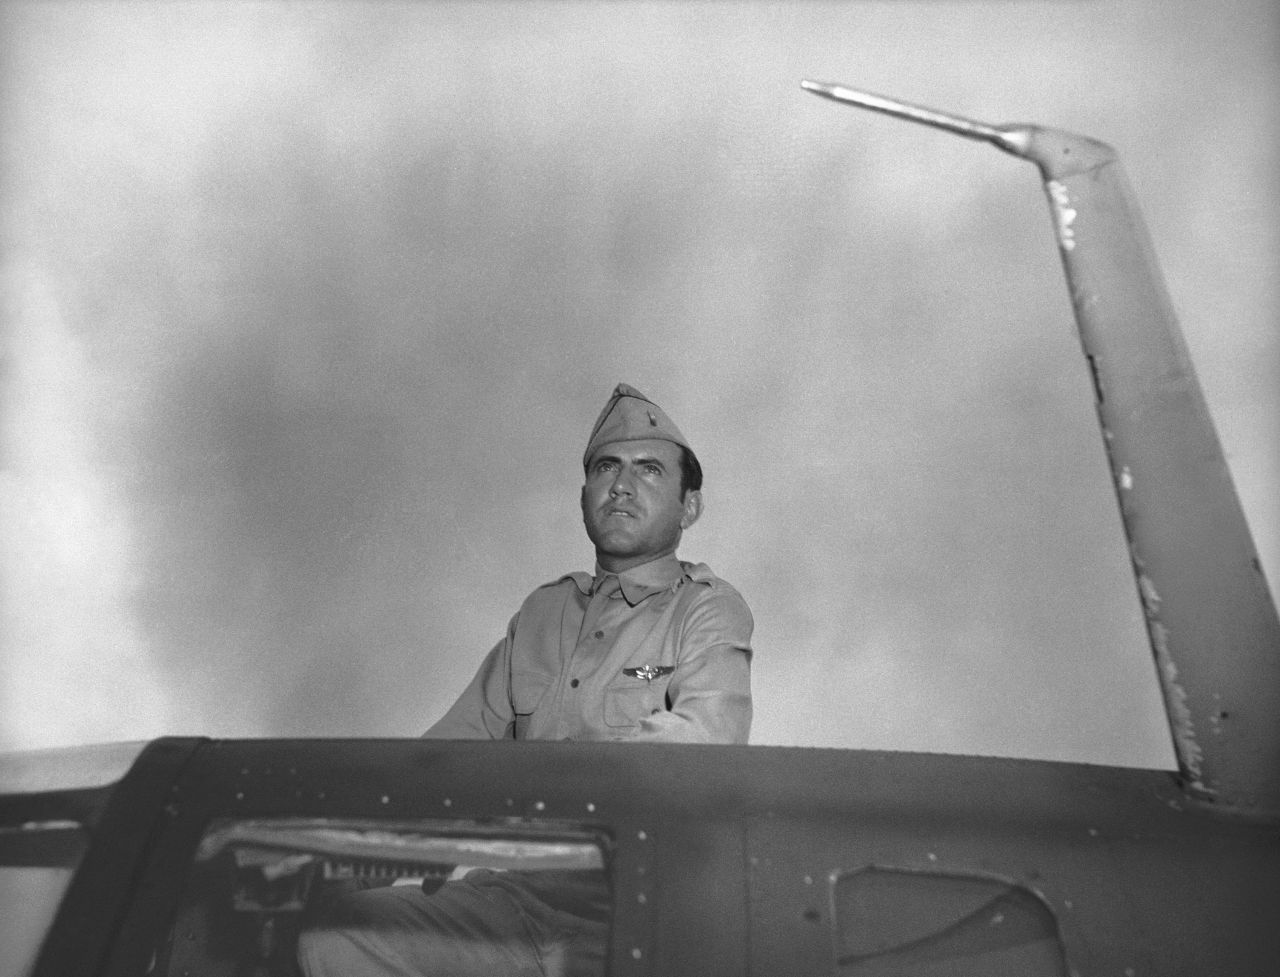 Olympian and World War II hero <a href="http://www.cnn.com/2014/07/03/showbiz/movies/obit-zamperini-unbroken/index.html">Louis Zamperini</a>, the subject of the book and upcoming film "Unbroken," died July 2 after a recent battle with pneumonia. The 97-year-old peacefully passed away in the presence of his entire family, according to a statement.